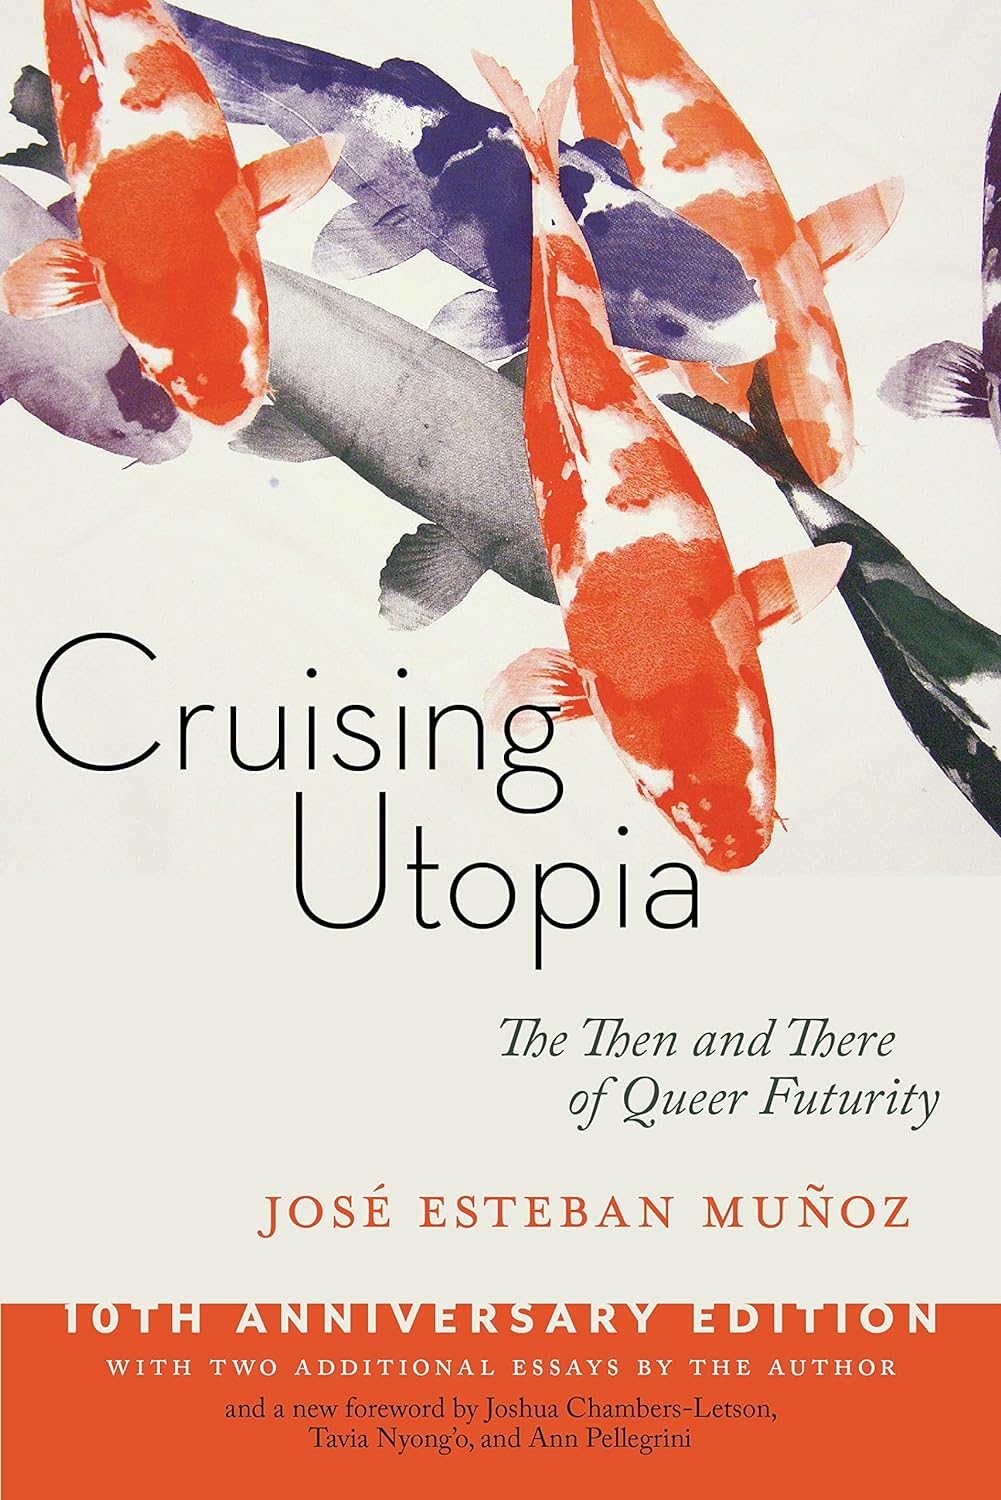 Cruising Utopia // The Then and There of Queer Futurity (10th Anniversary Edition)